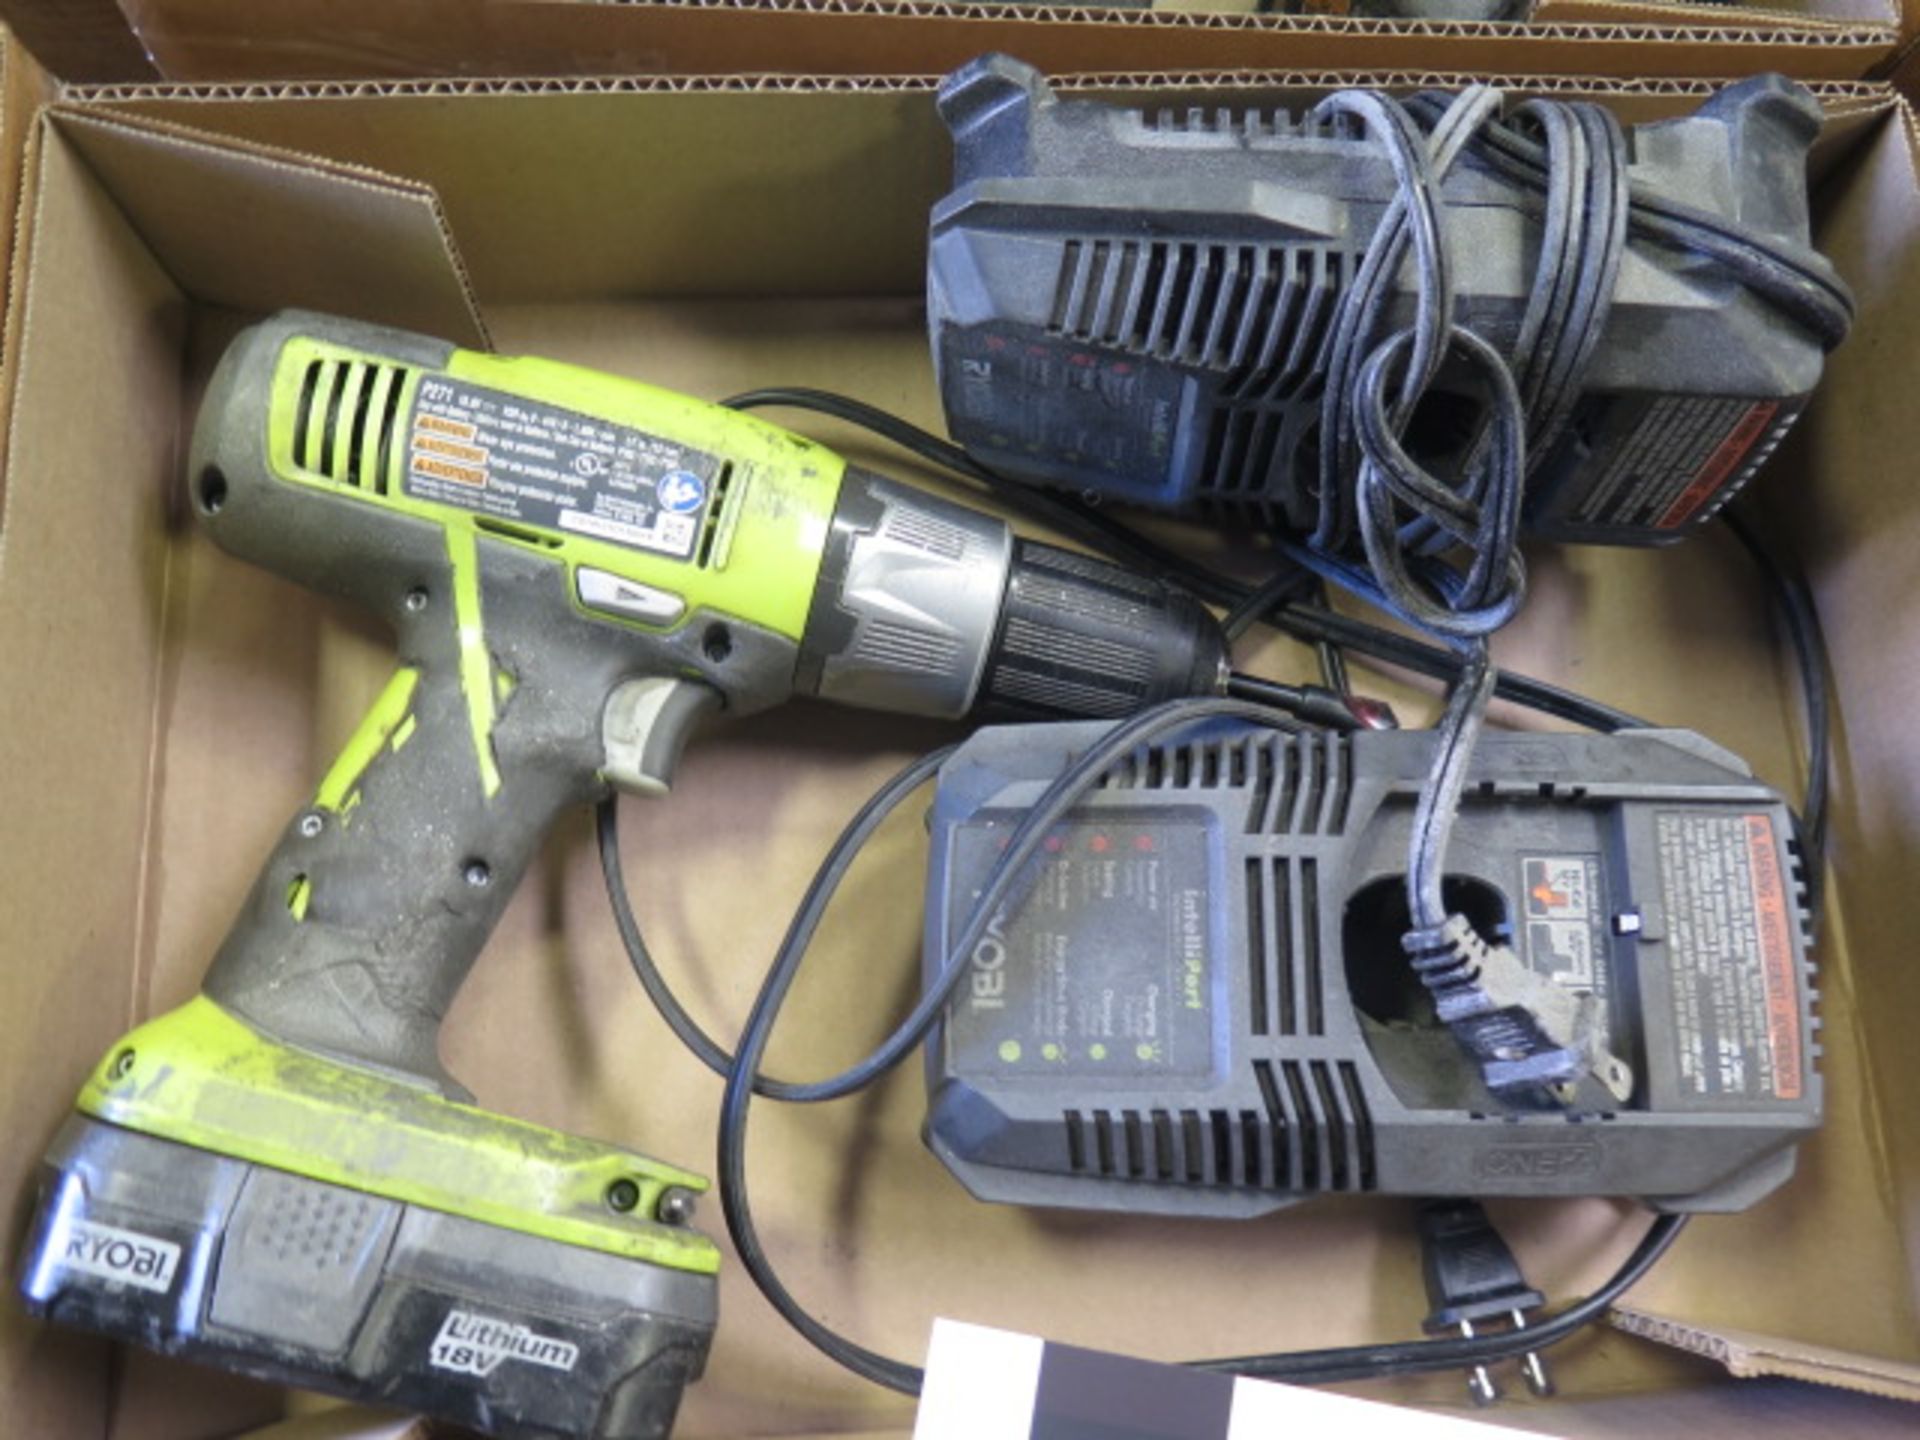 Ryobi 18Volt Cordless Drill w/ Charger (SOLD AS-IS - NO WARRANTY) - Image 2 of 2